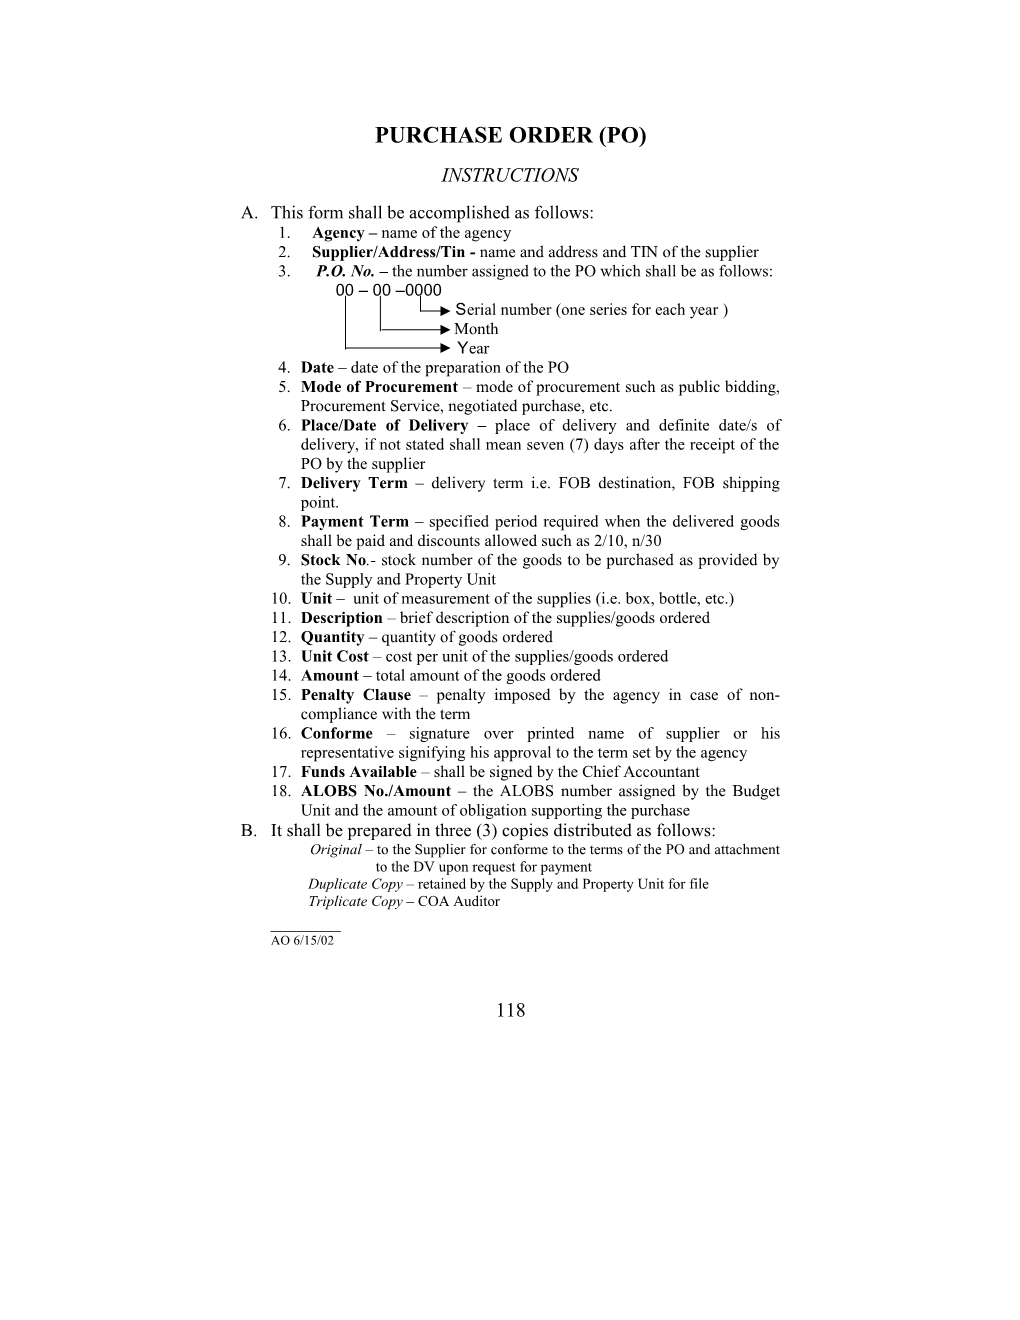 Appendix 52 - Purchase Order (PO) Instructions